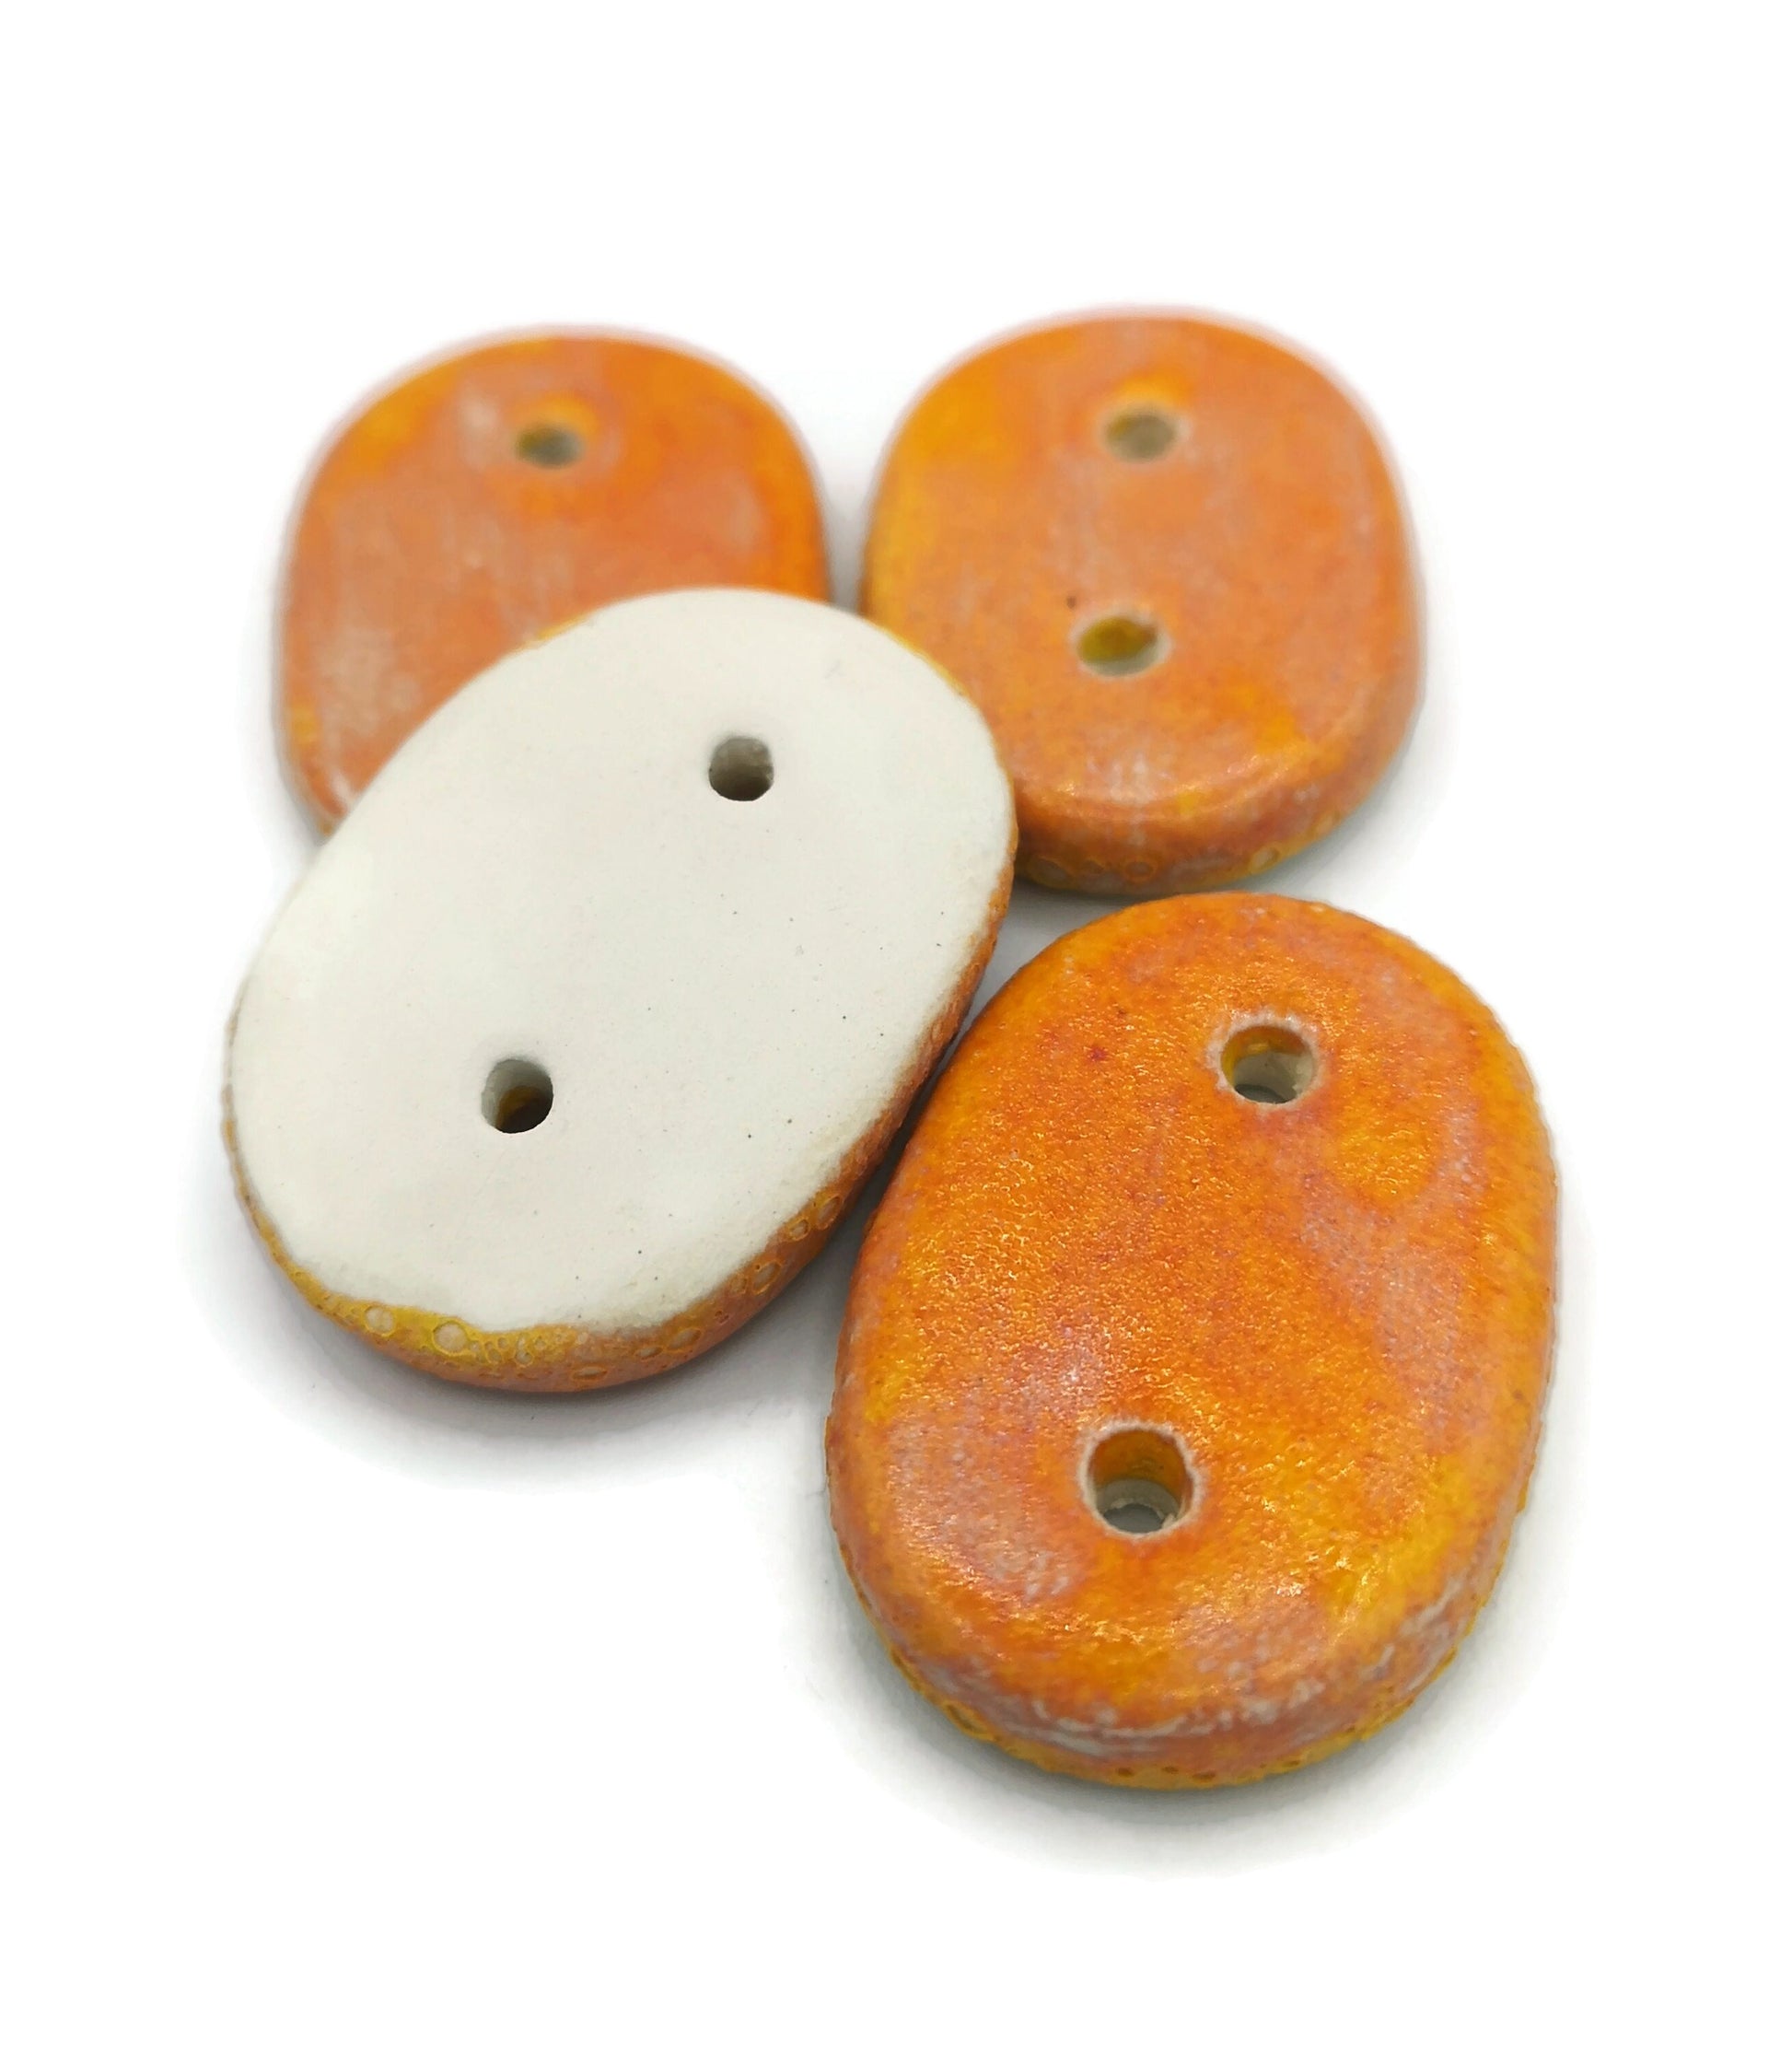 Decorative Sewing Buttons Flat Back 2 Holes, Antique Look Sewing Supplies And notions, Handmade Ceramic Custom Buttons, Large Fancy Buttons - Ceramica Ana Rafael